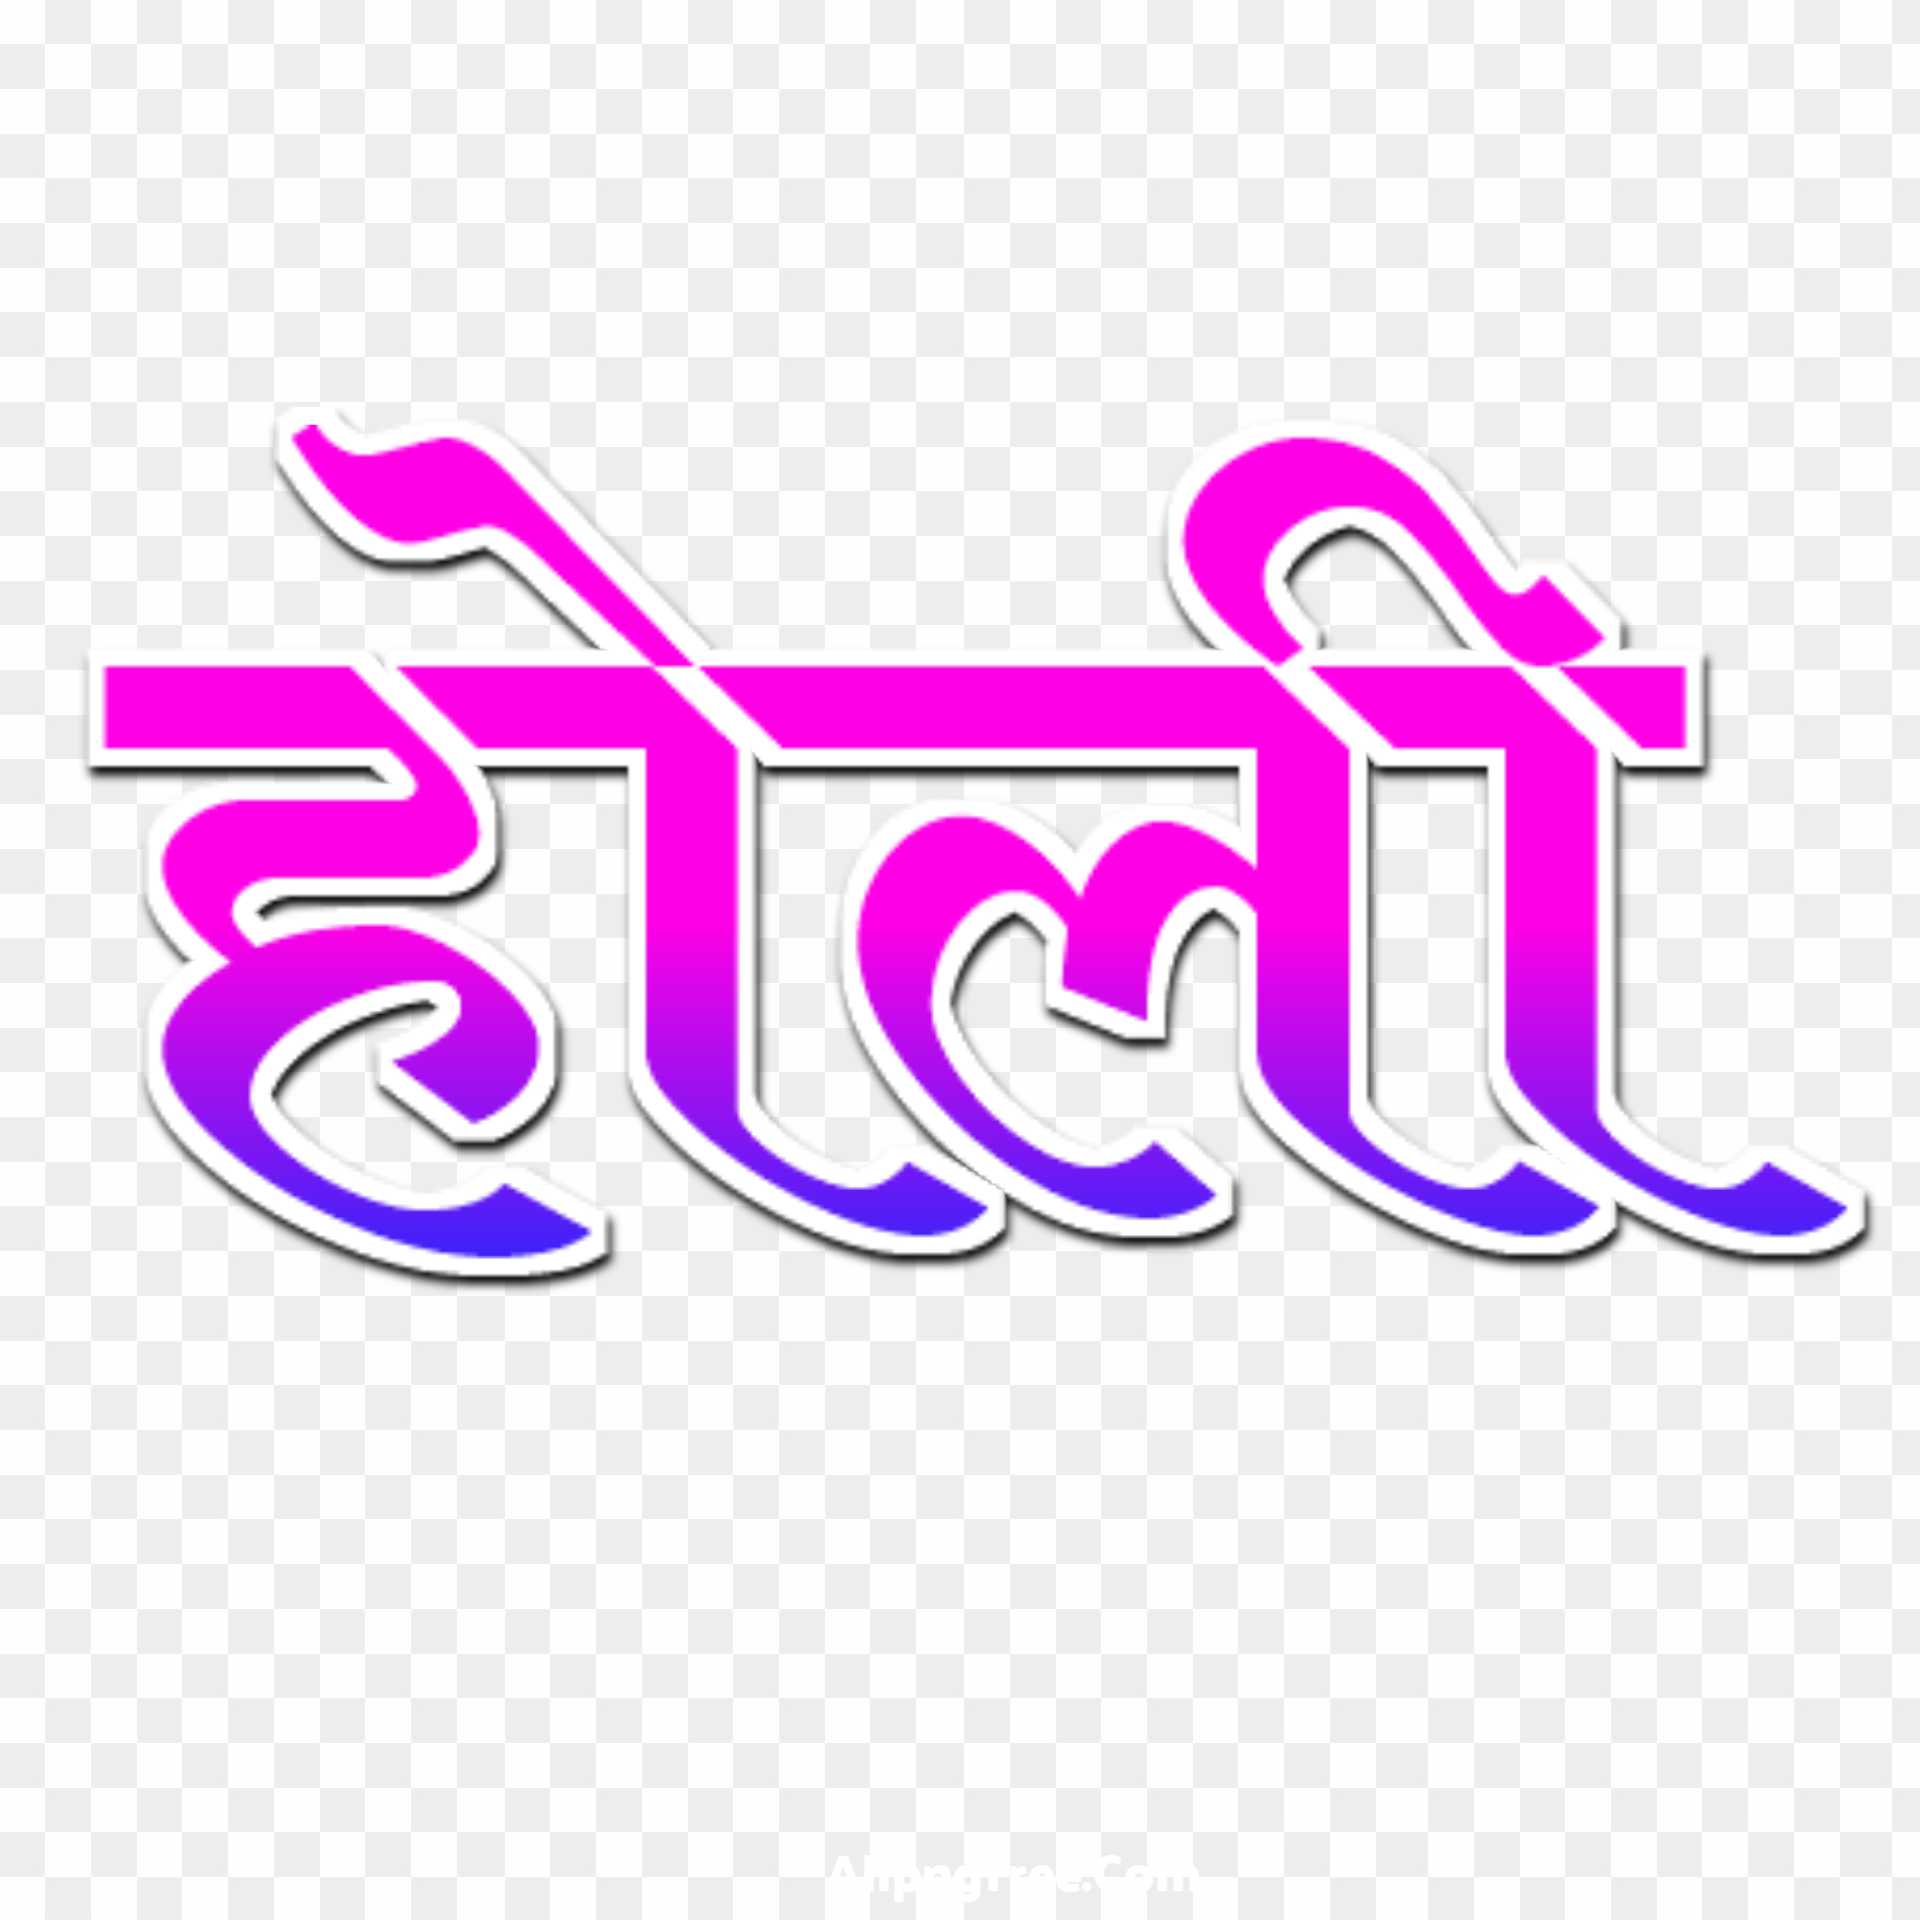 Happy Holi in Hindi text PNG images download